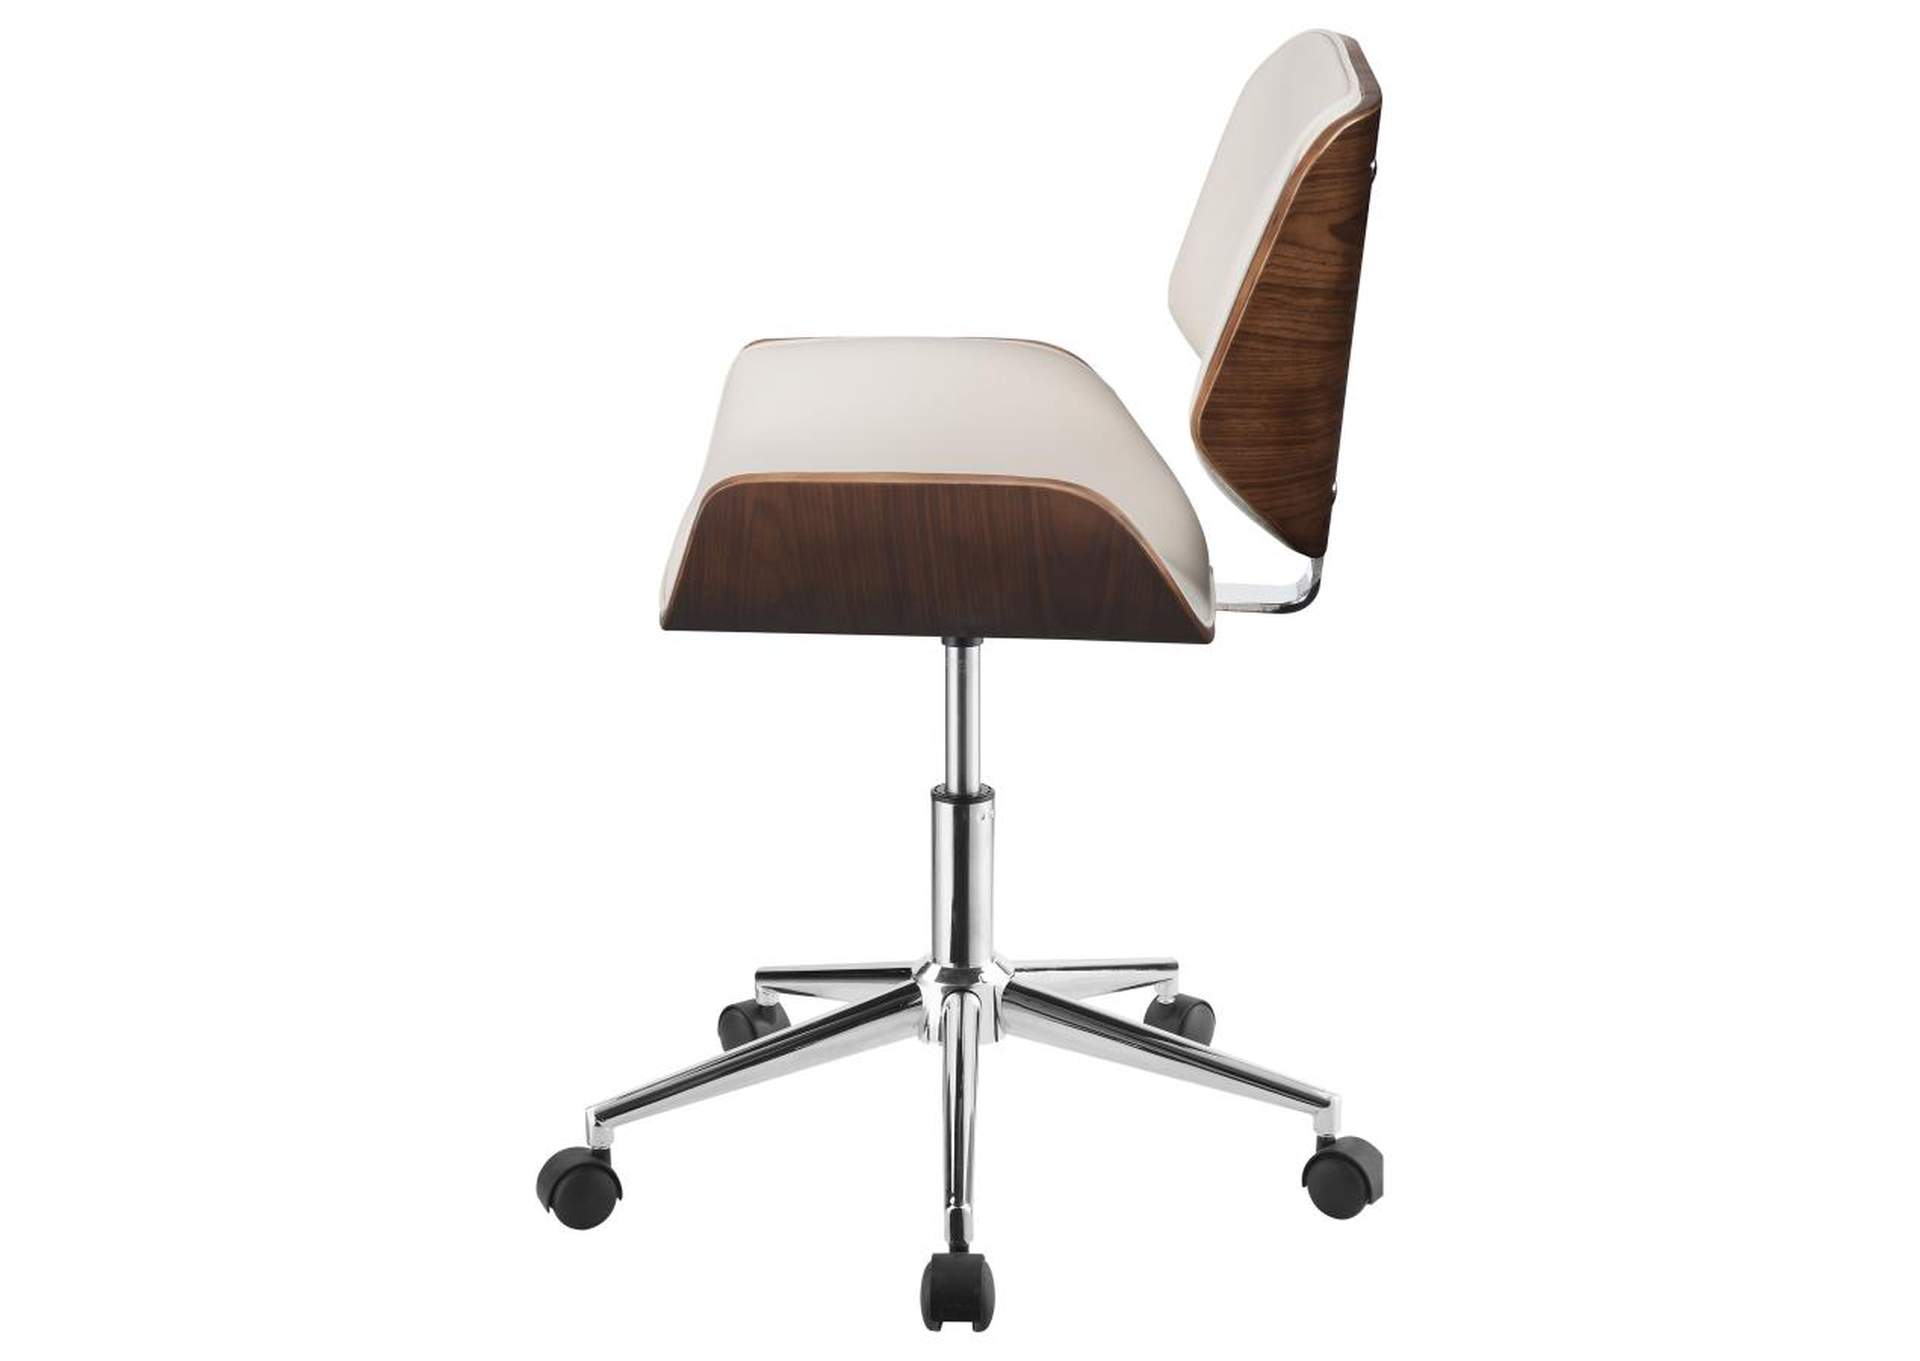 Adjustable Height Office Chair Ecru and Chrome,Coaster Furniture